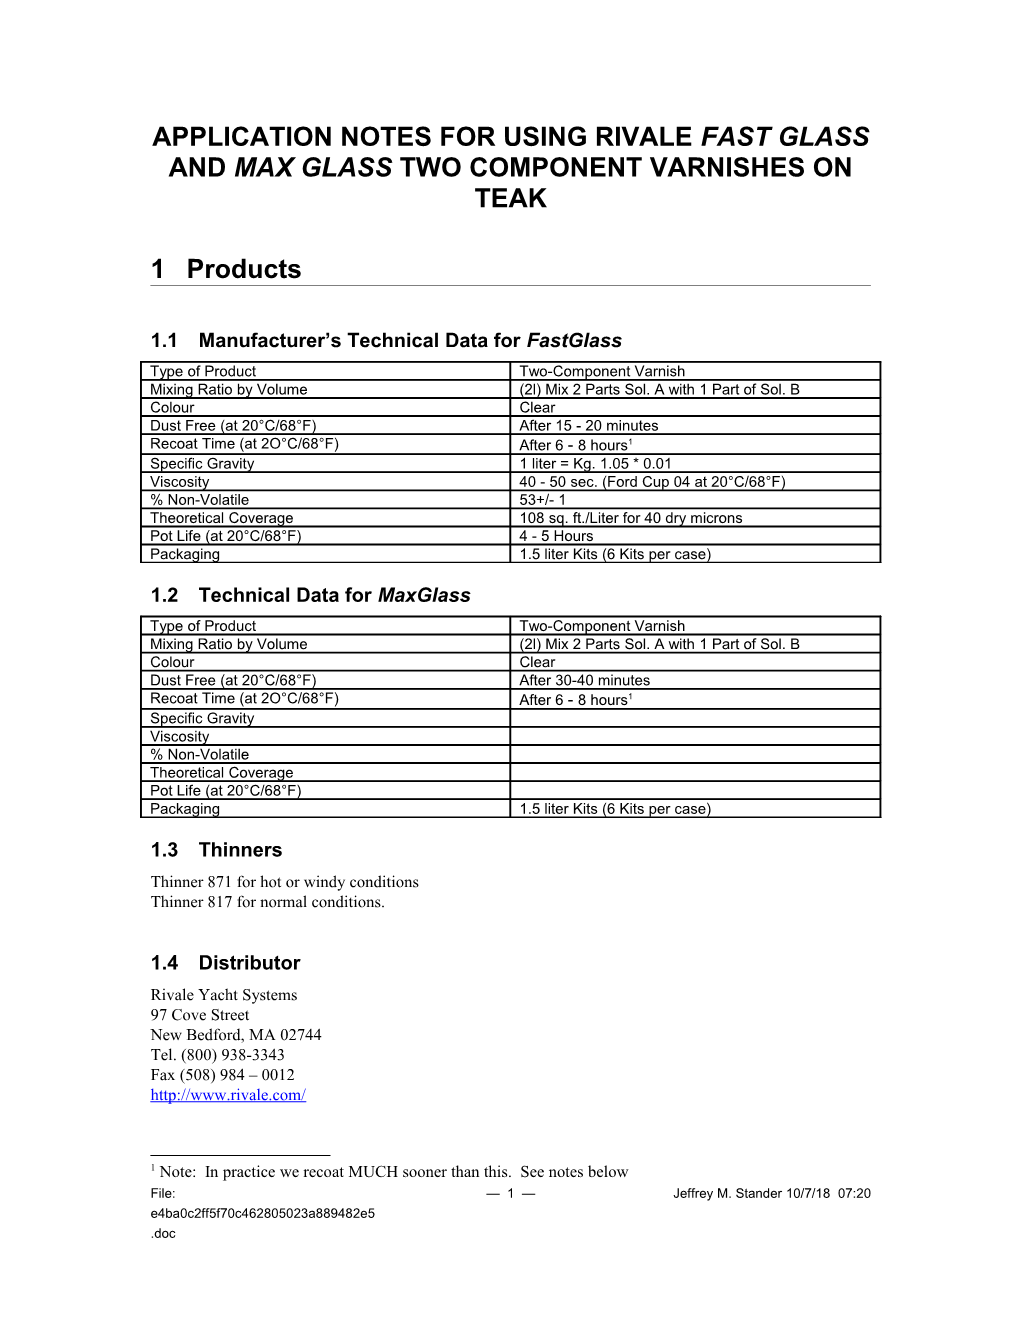 Application Notes for Using Rivale Fast Glass and Max Glass Two Component Varnishes on Teak